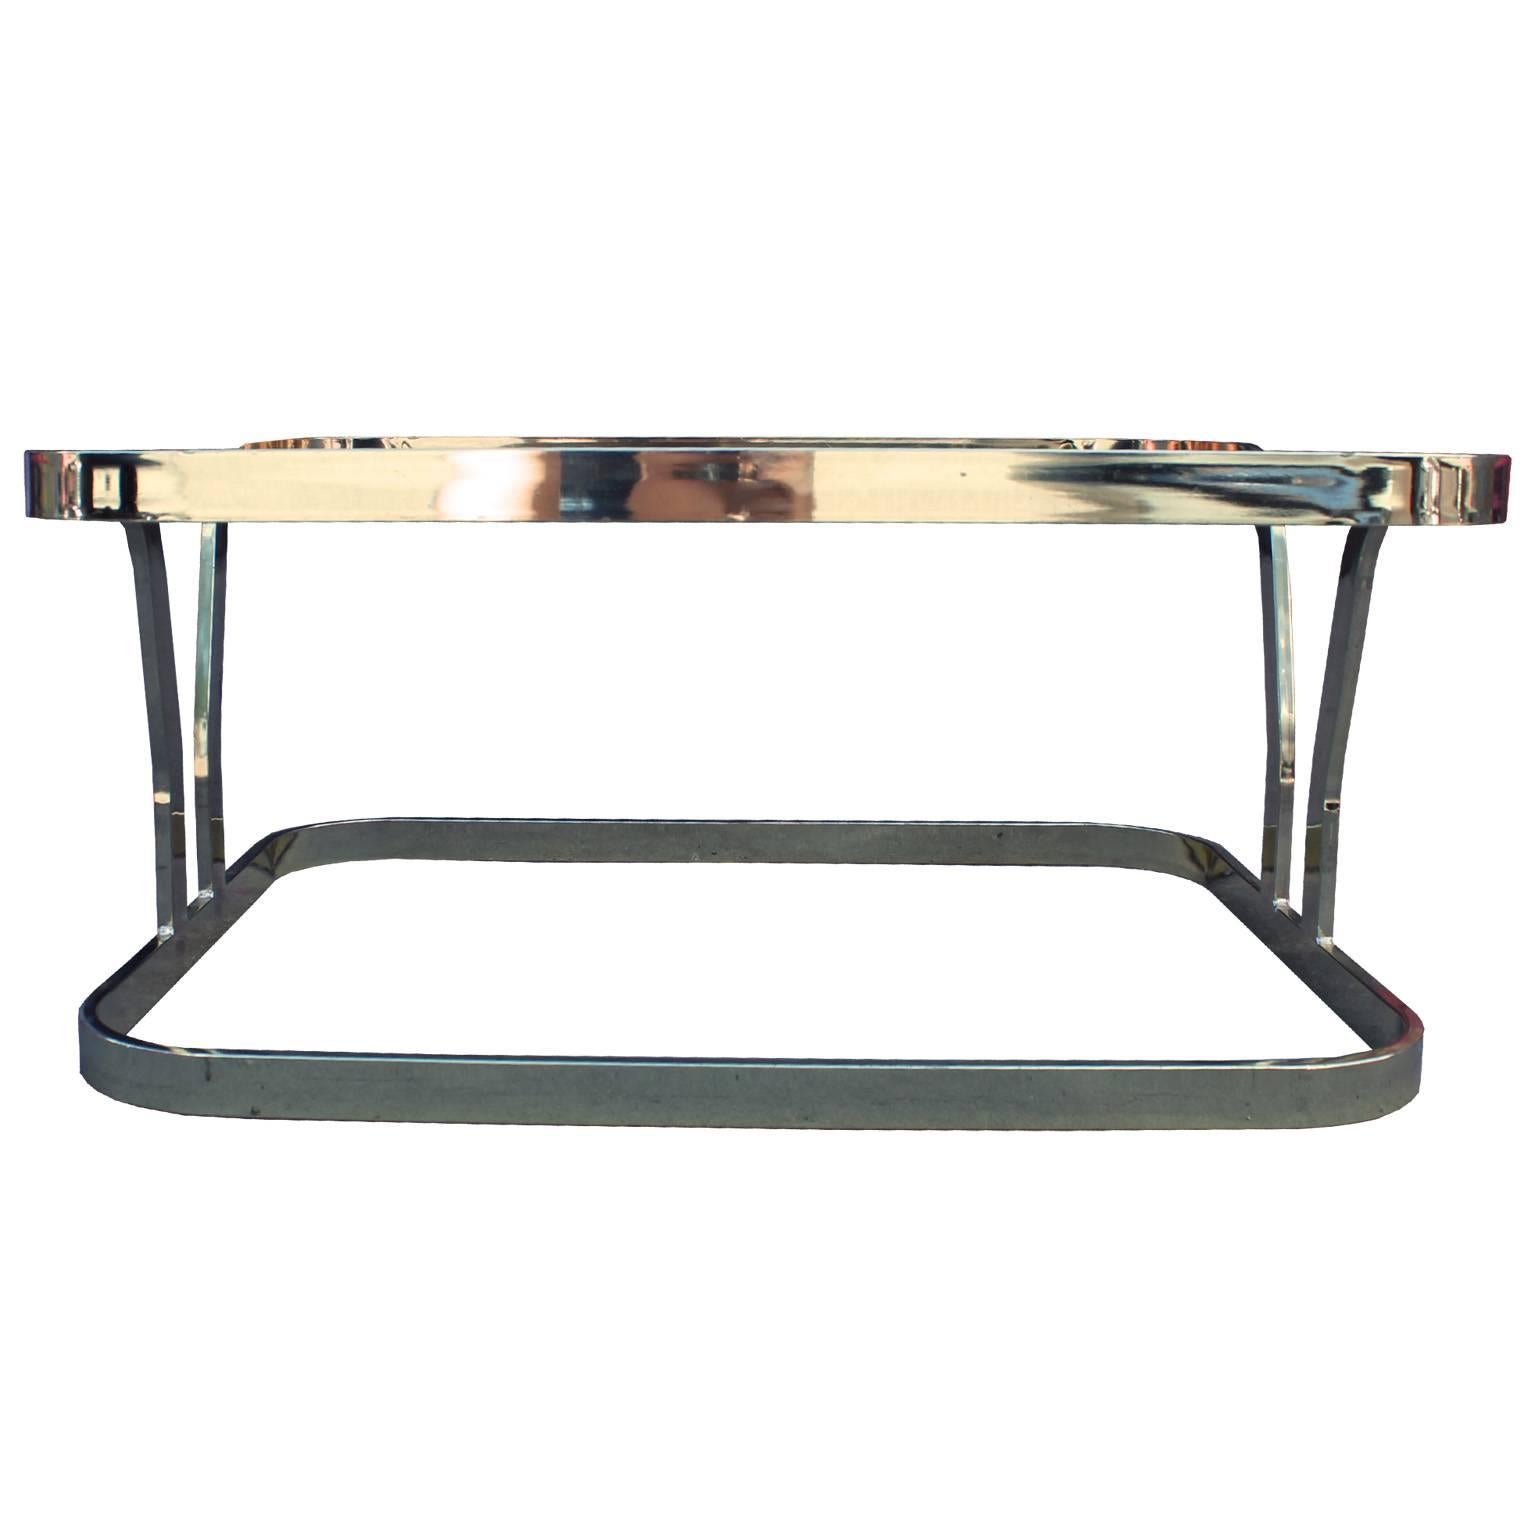 Hollywood Regency Sculptural Square Brass and Glass Modern Minimalist Coffee Table